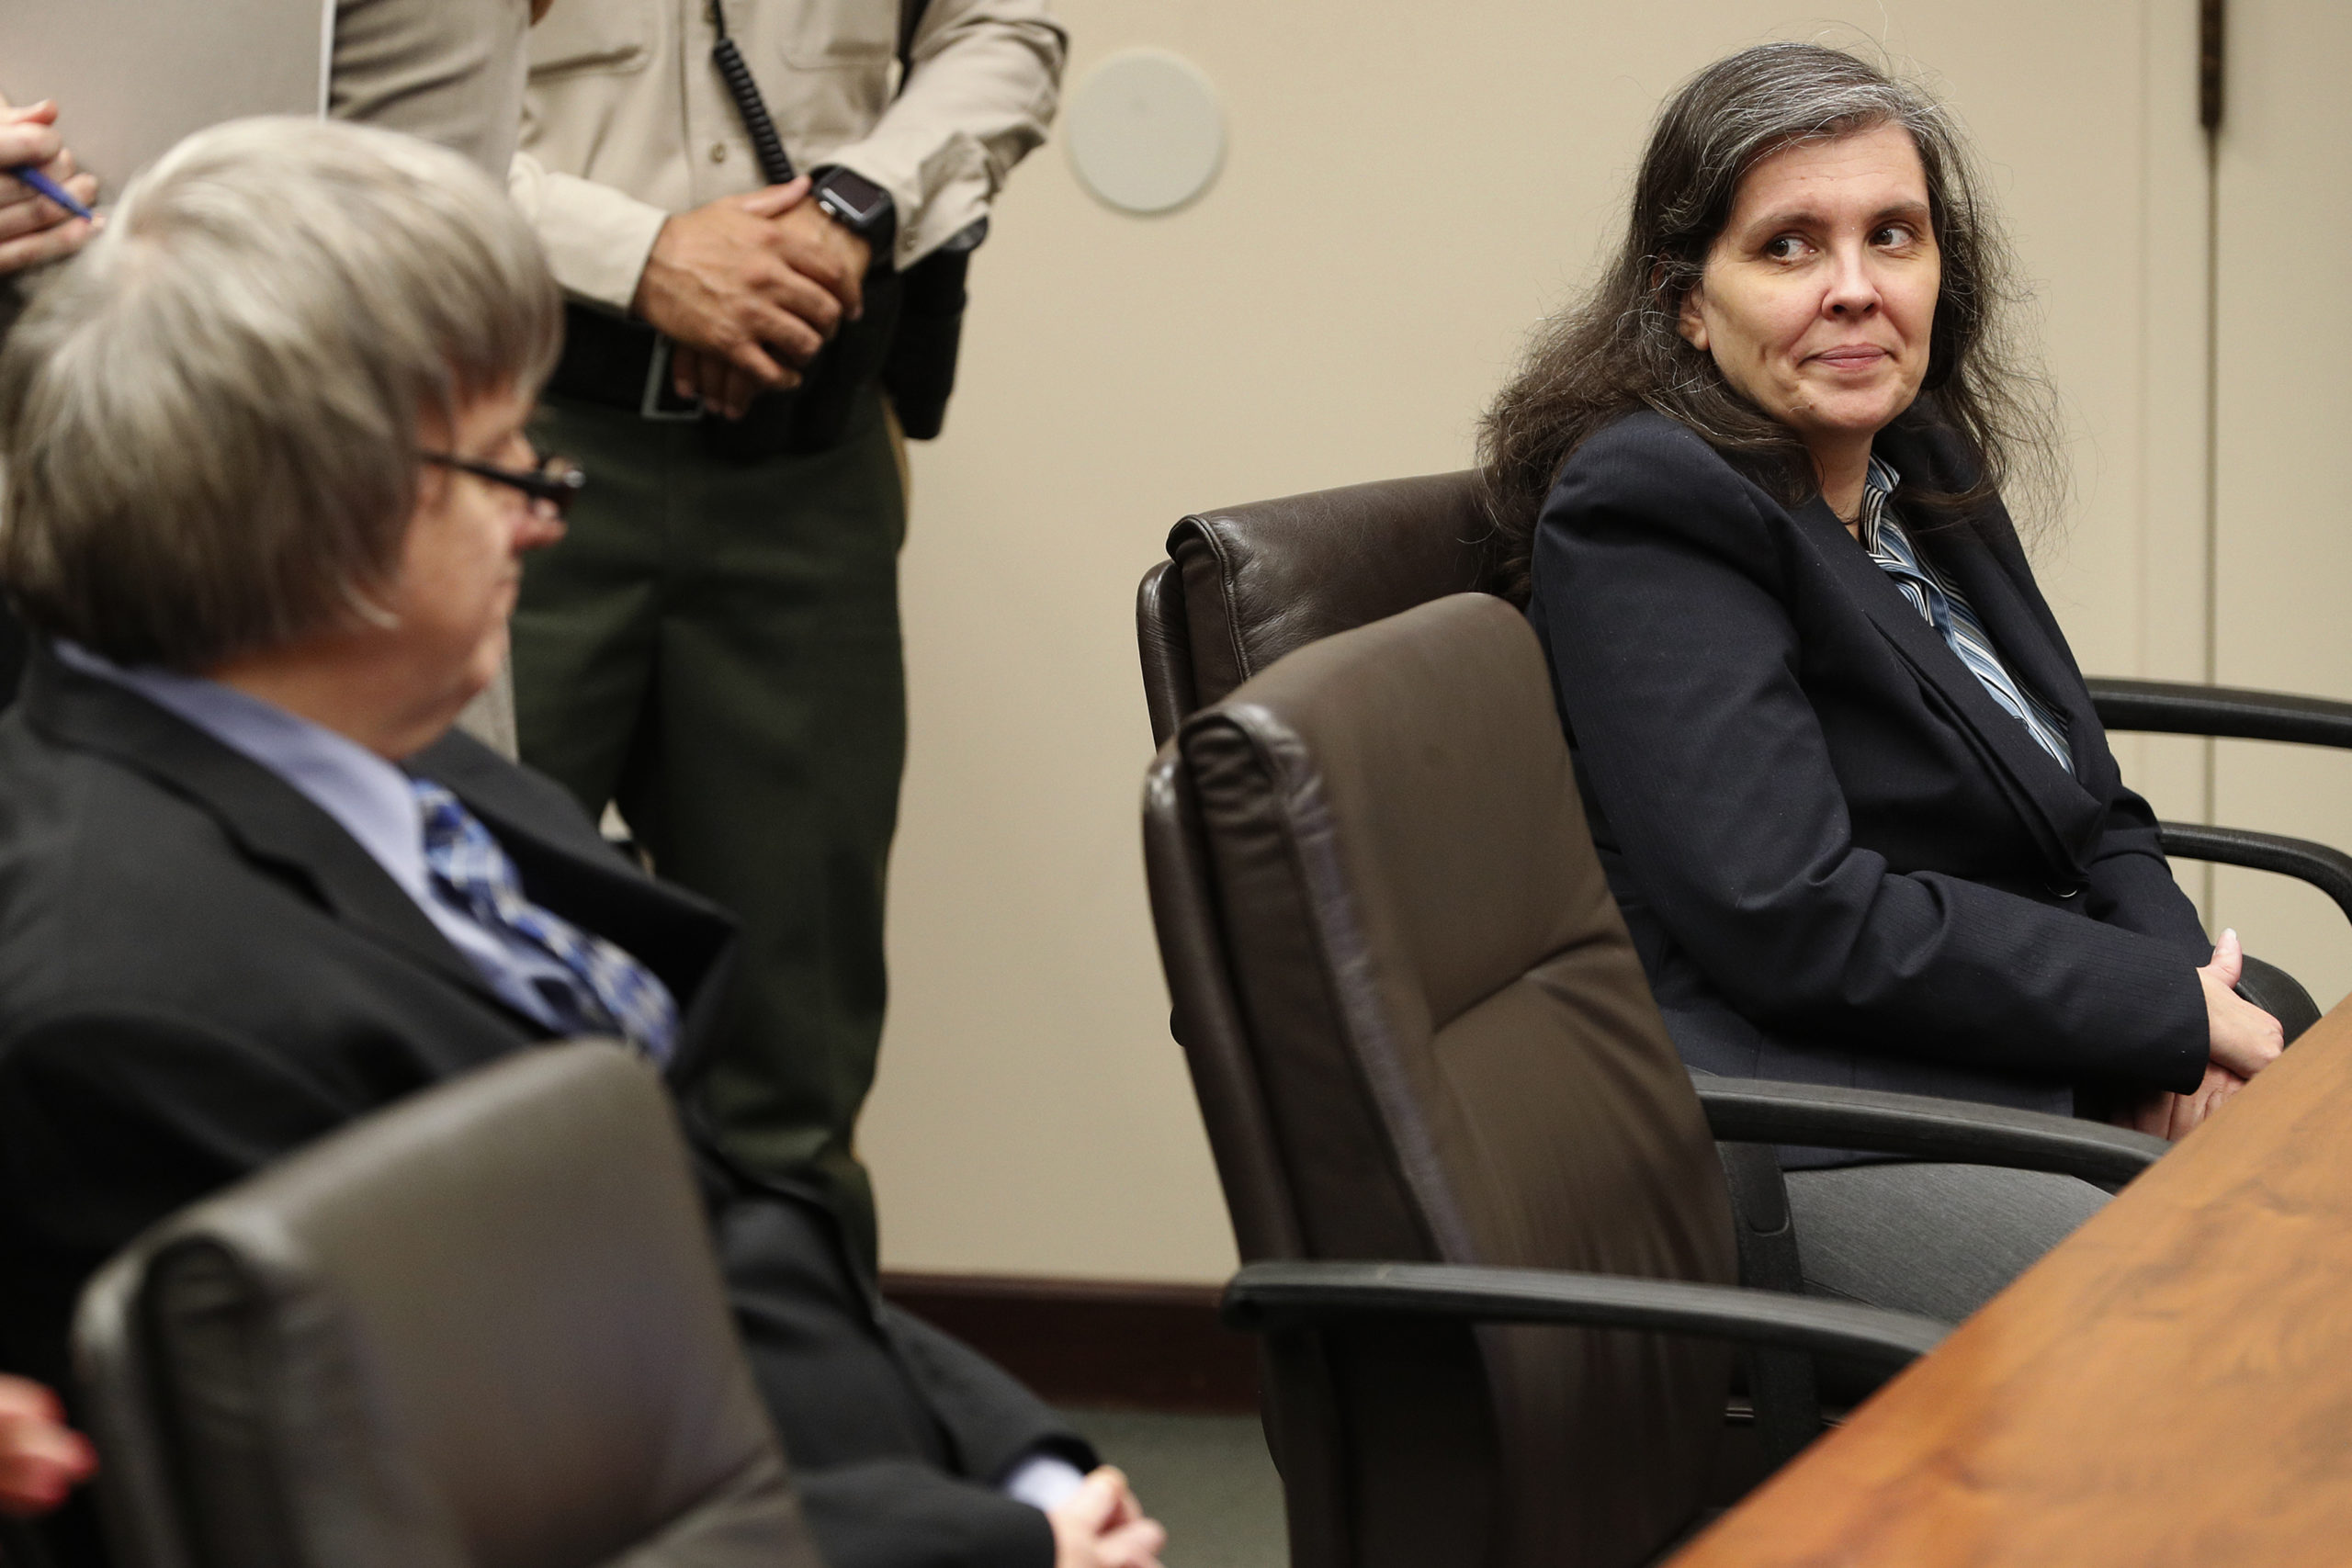 RIVERSIDE, CA - FEBRUARY 23: David Allen Turpin (L) and Louise Anna Turpin (R), accused of abusing and holding 13 of their children captive, appear in court on February 23, 2018 in Riverside, California. According to Riverside County Sheriffs, David Allen Turpin and Louise Anna Turpin held 13 malnourished children ranging in age from 2 to 29 captive in their Perris, California home. Deputies were alerted after a 17-year-old daughter escaped by jumping through a window shortly before dawn, carrying a de-activated mobile phone from which she was able to call 911 for help. Responding deputies described conditions in the home as foul-smelling with some kids chained to a bed and suffering injuries as a result. Adult children appeared at first to be minors because of their malnourished state. The Turpins were arrested on charges of torture and child endangerment. (Photo by Gina Ferazzi-Pool/Getty Images)